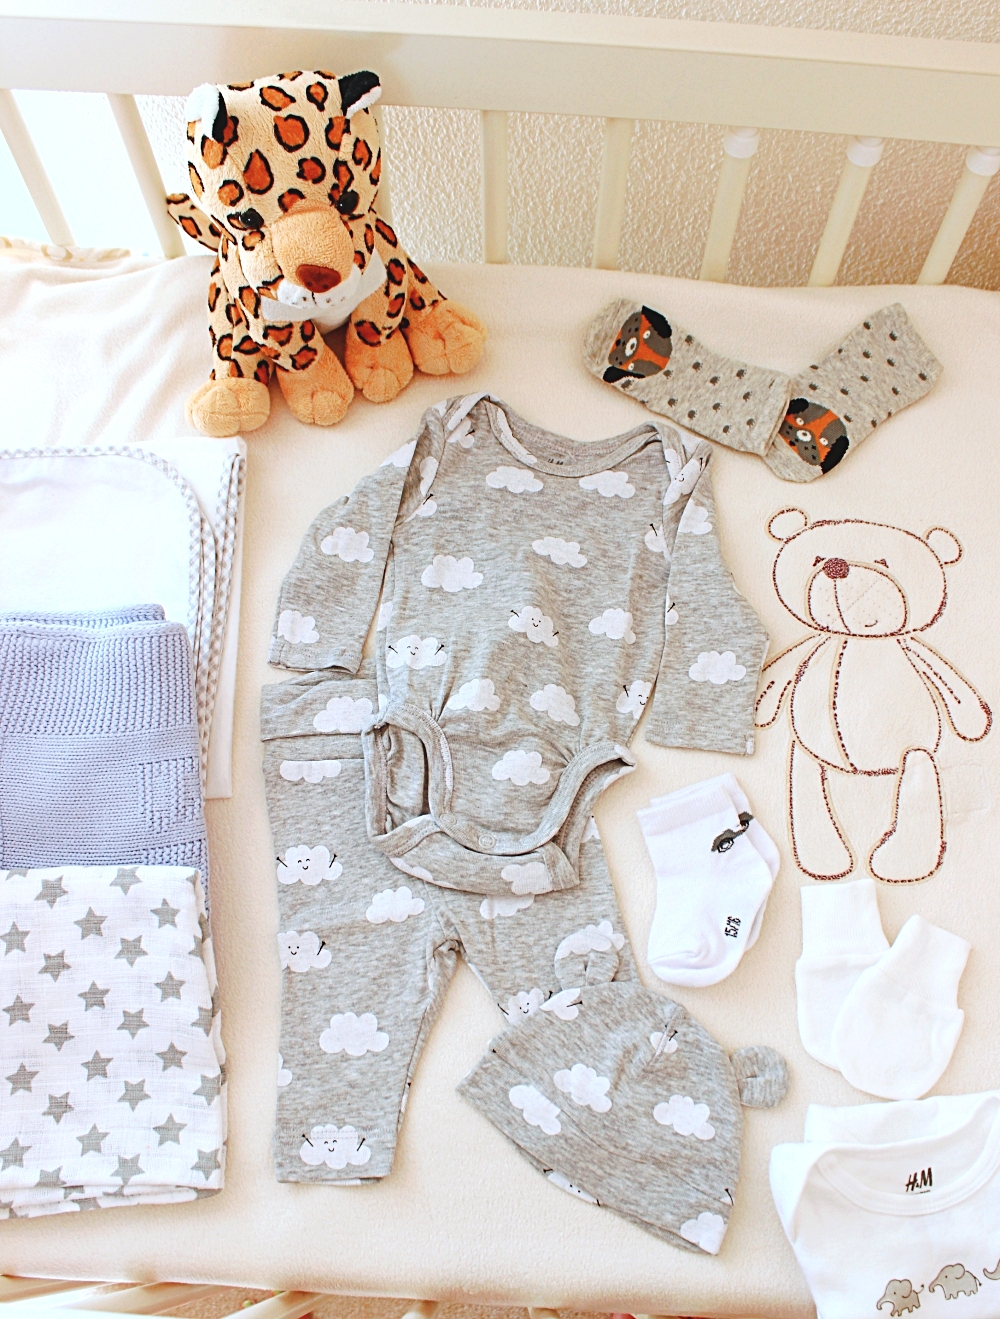 hospital bag checklist for baby, what to pack for a baby boy in hospital bag